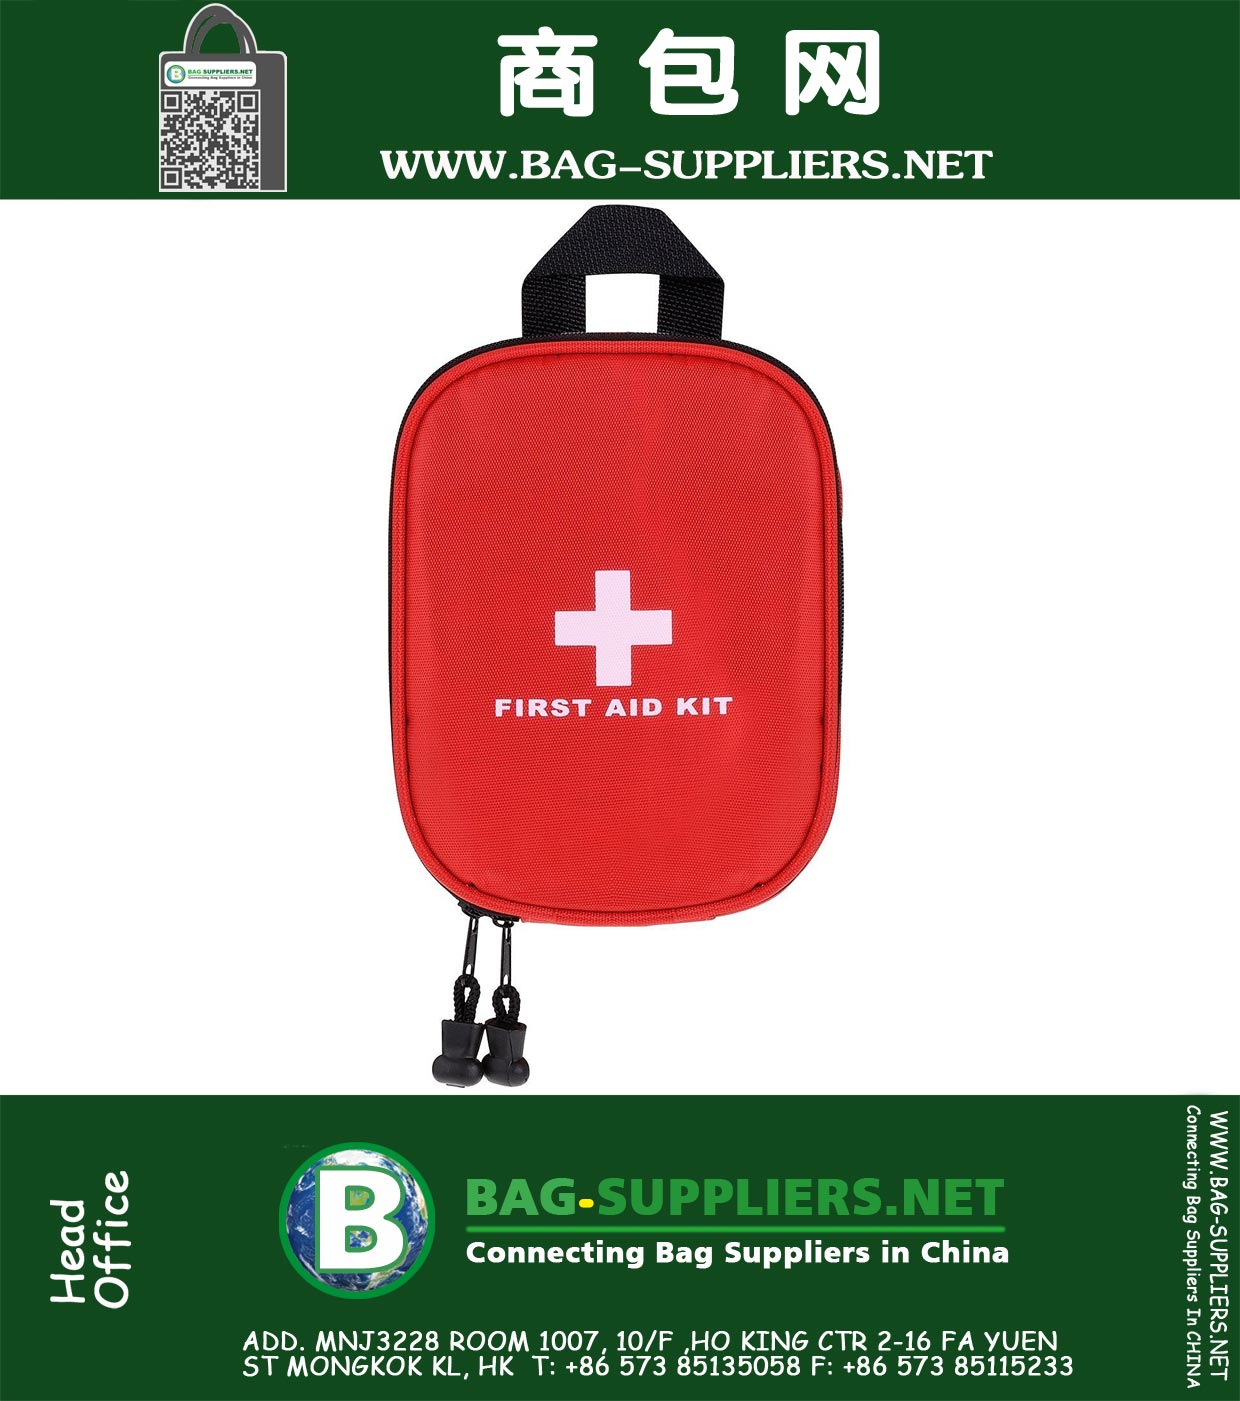 First Aid Kits 31 Pieces Survival Emergency Kits for Car Auto Home Office Boat Backpack Travel Stroller Camping Hiking Sports any Emergency Travel Medical Emergency Treatment Packs Set